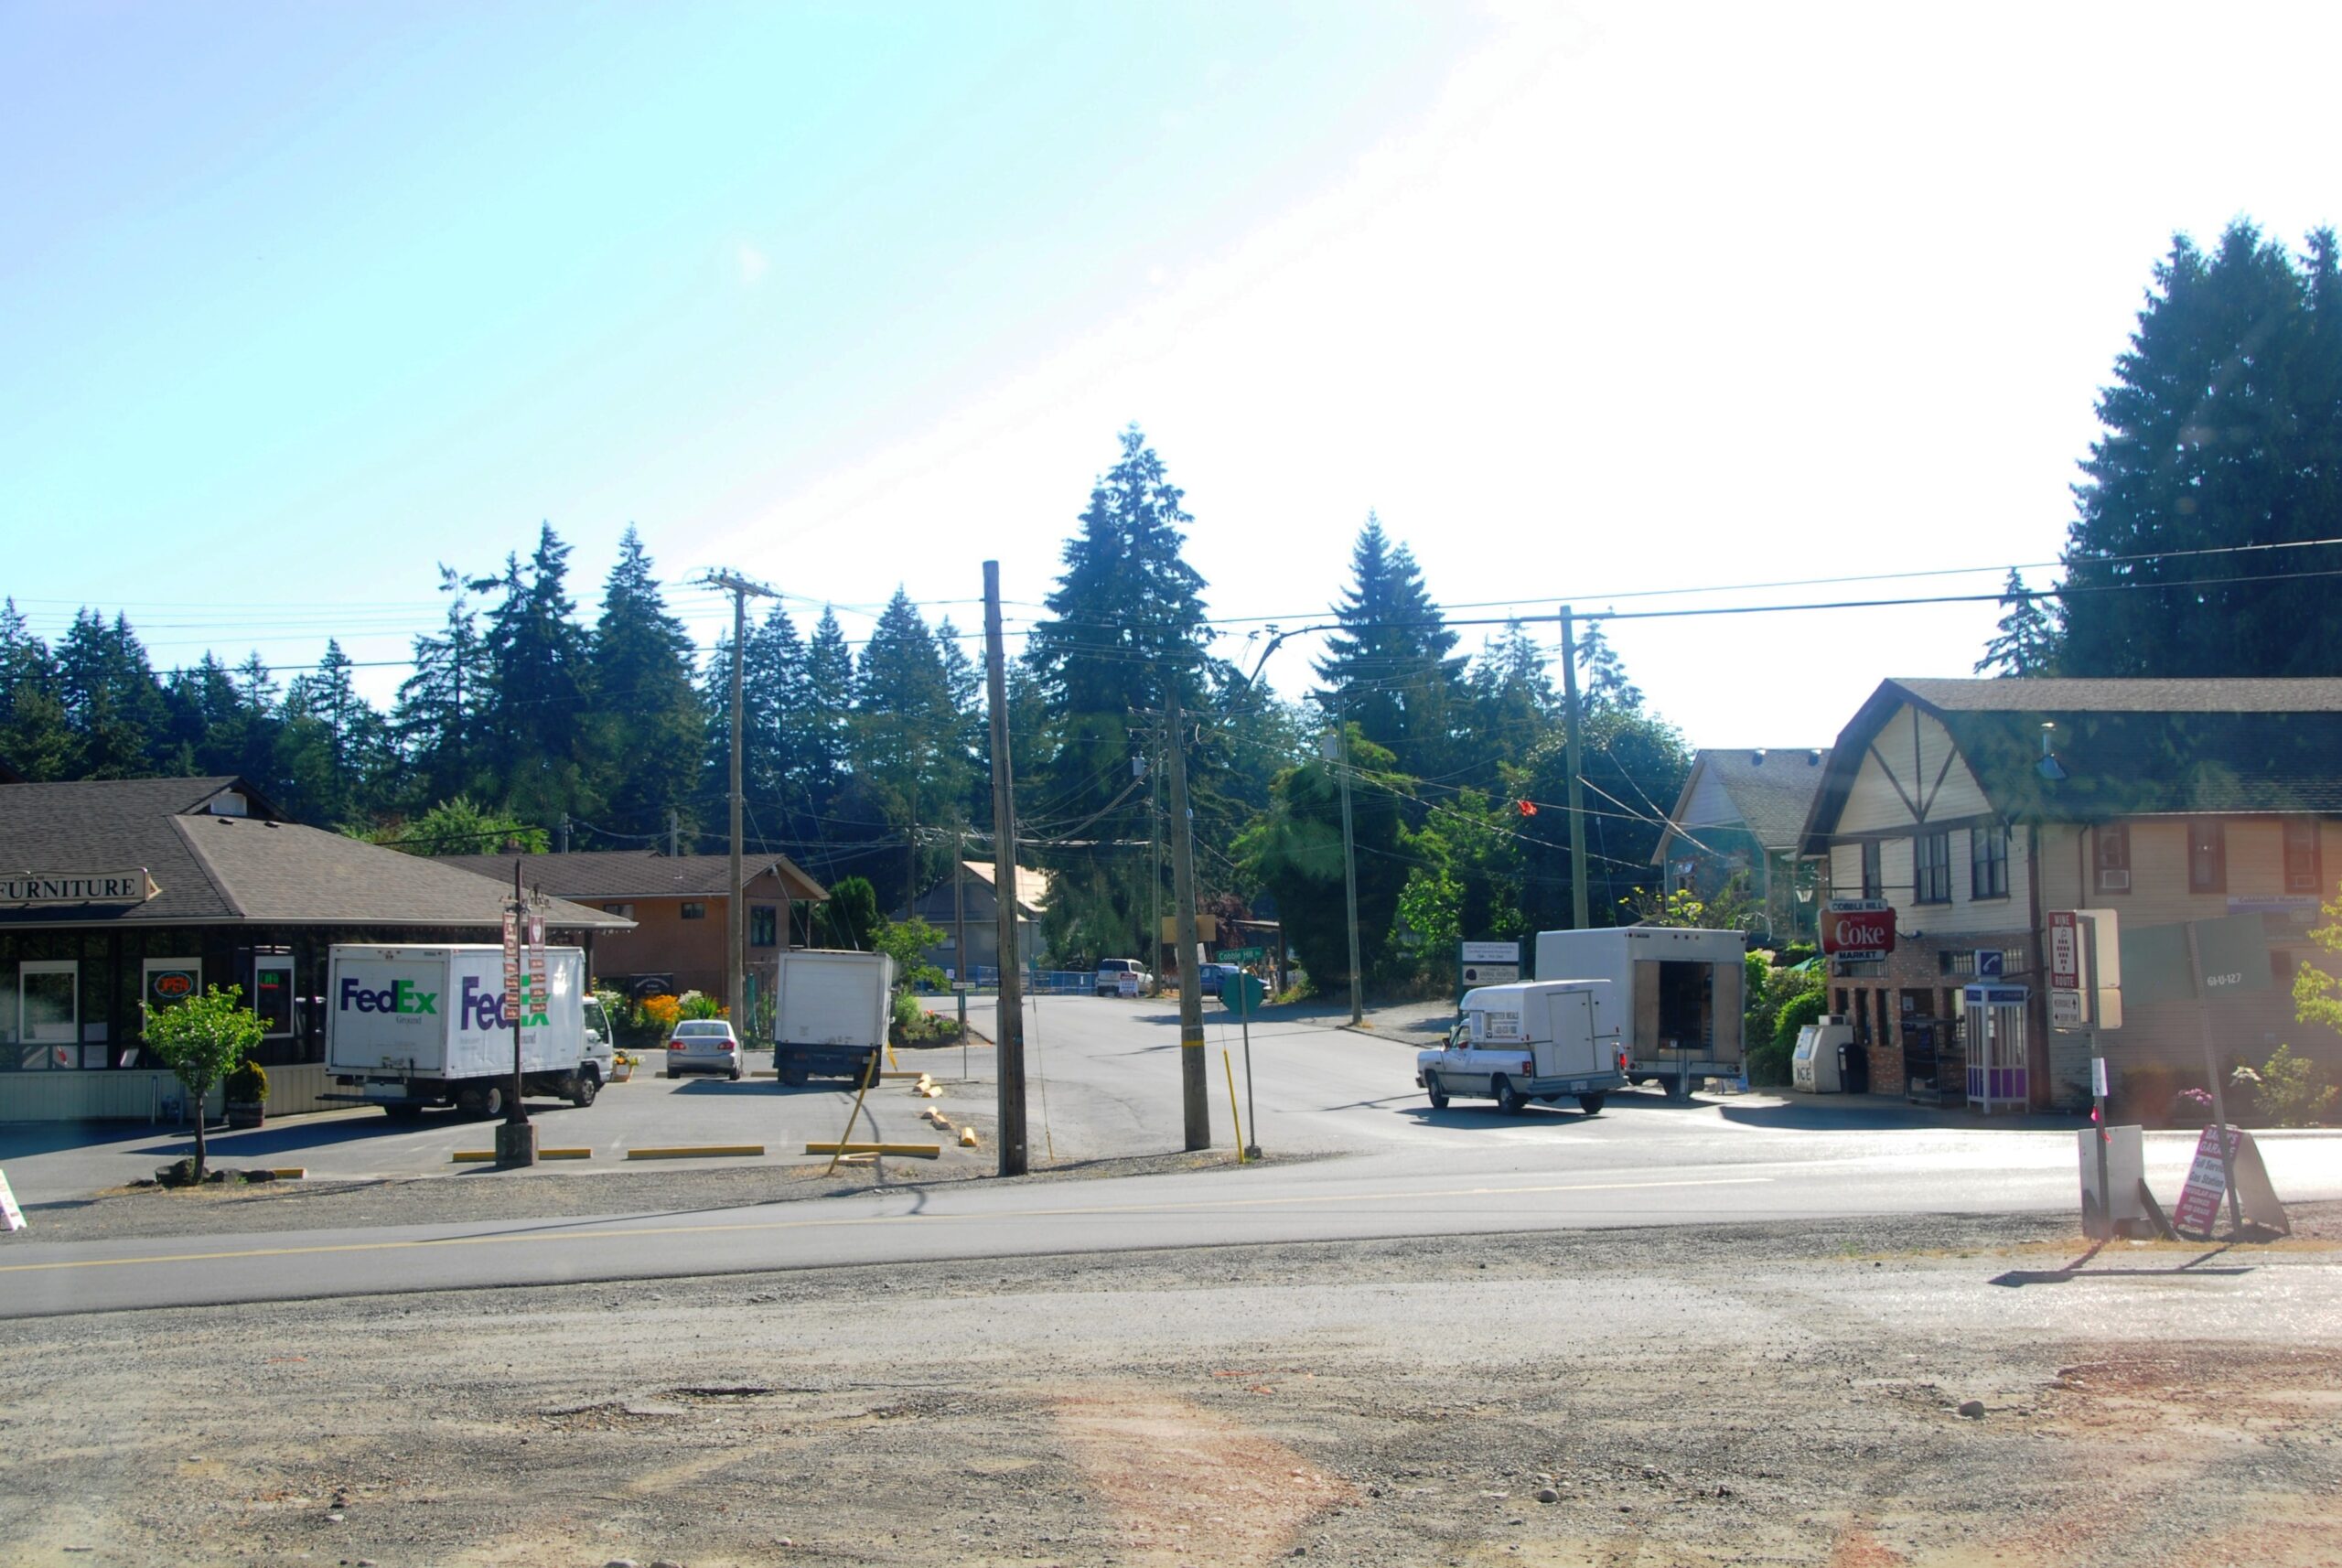 A photo of Cobble Hill, BC. A T-intersection shows an old-fashioned corner store, a few cars and trucks driving about or parked, and coniferous trees fringing the down. The day is bright.